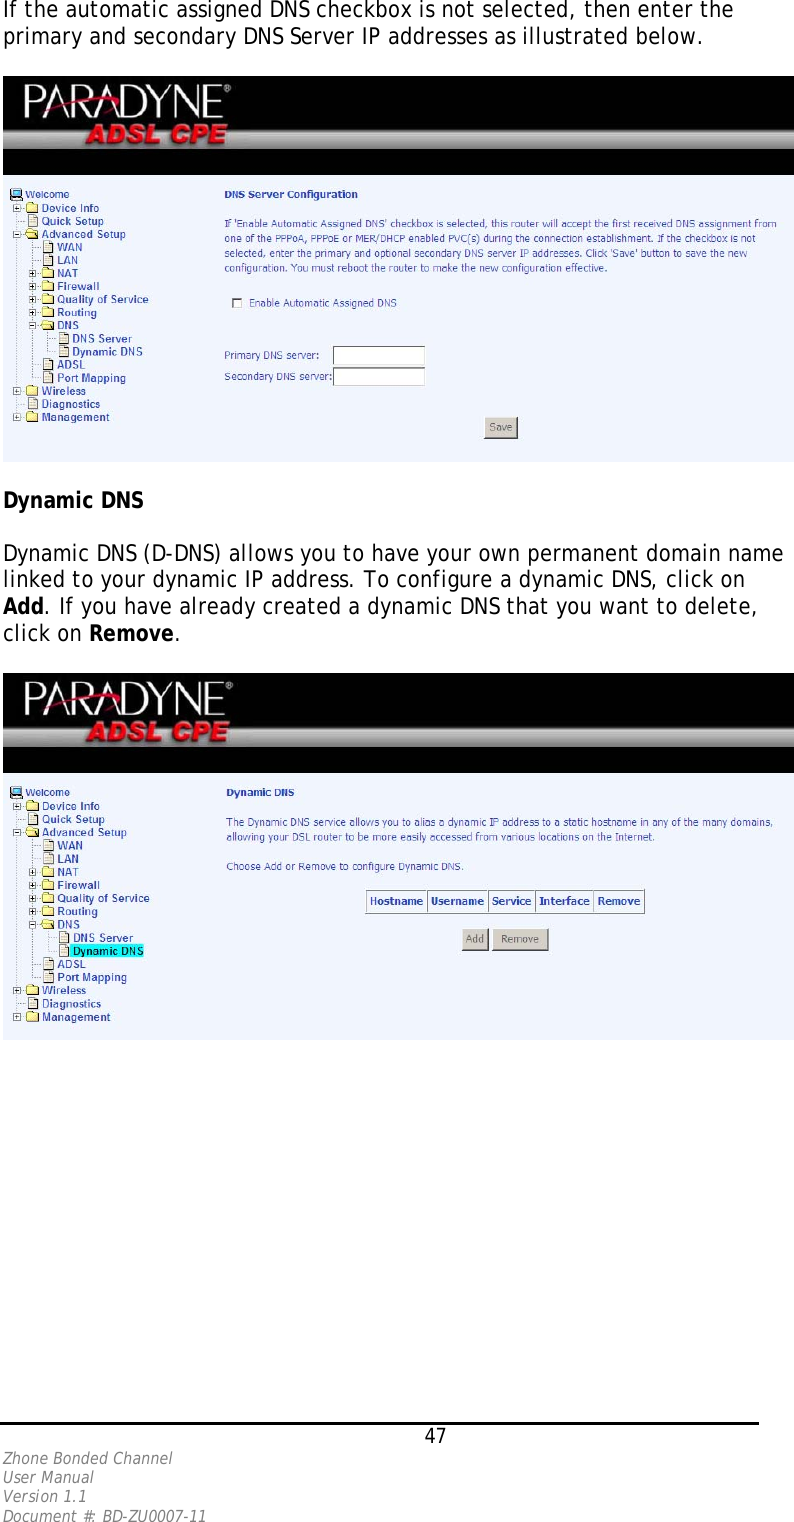 If the automatic assigned DNS checkbox is not selected, then enter the primary and secondary DNS Server IP addresses as illustrated below.    Dynamic DNS  Dynamic DNS (D-DNS) allows you to have your own permanent domain name linked to your dynamic IP address. To configure a dynamic DNS, click on Add. If you have already created a dynamic DNS that you want to delete, click on Remove.       47 Zhone Bonded Channel User Manual  Version 1.1 Document #: BD-ZU0007-11 